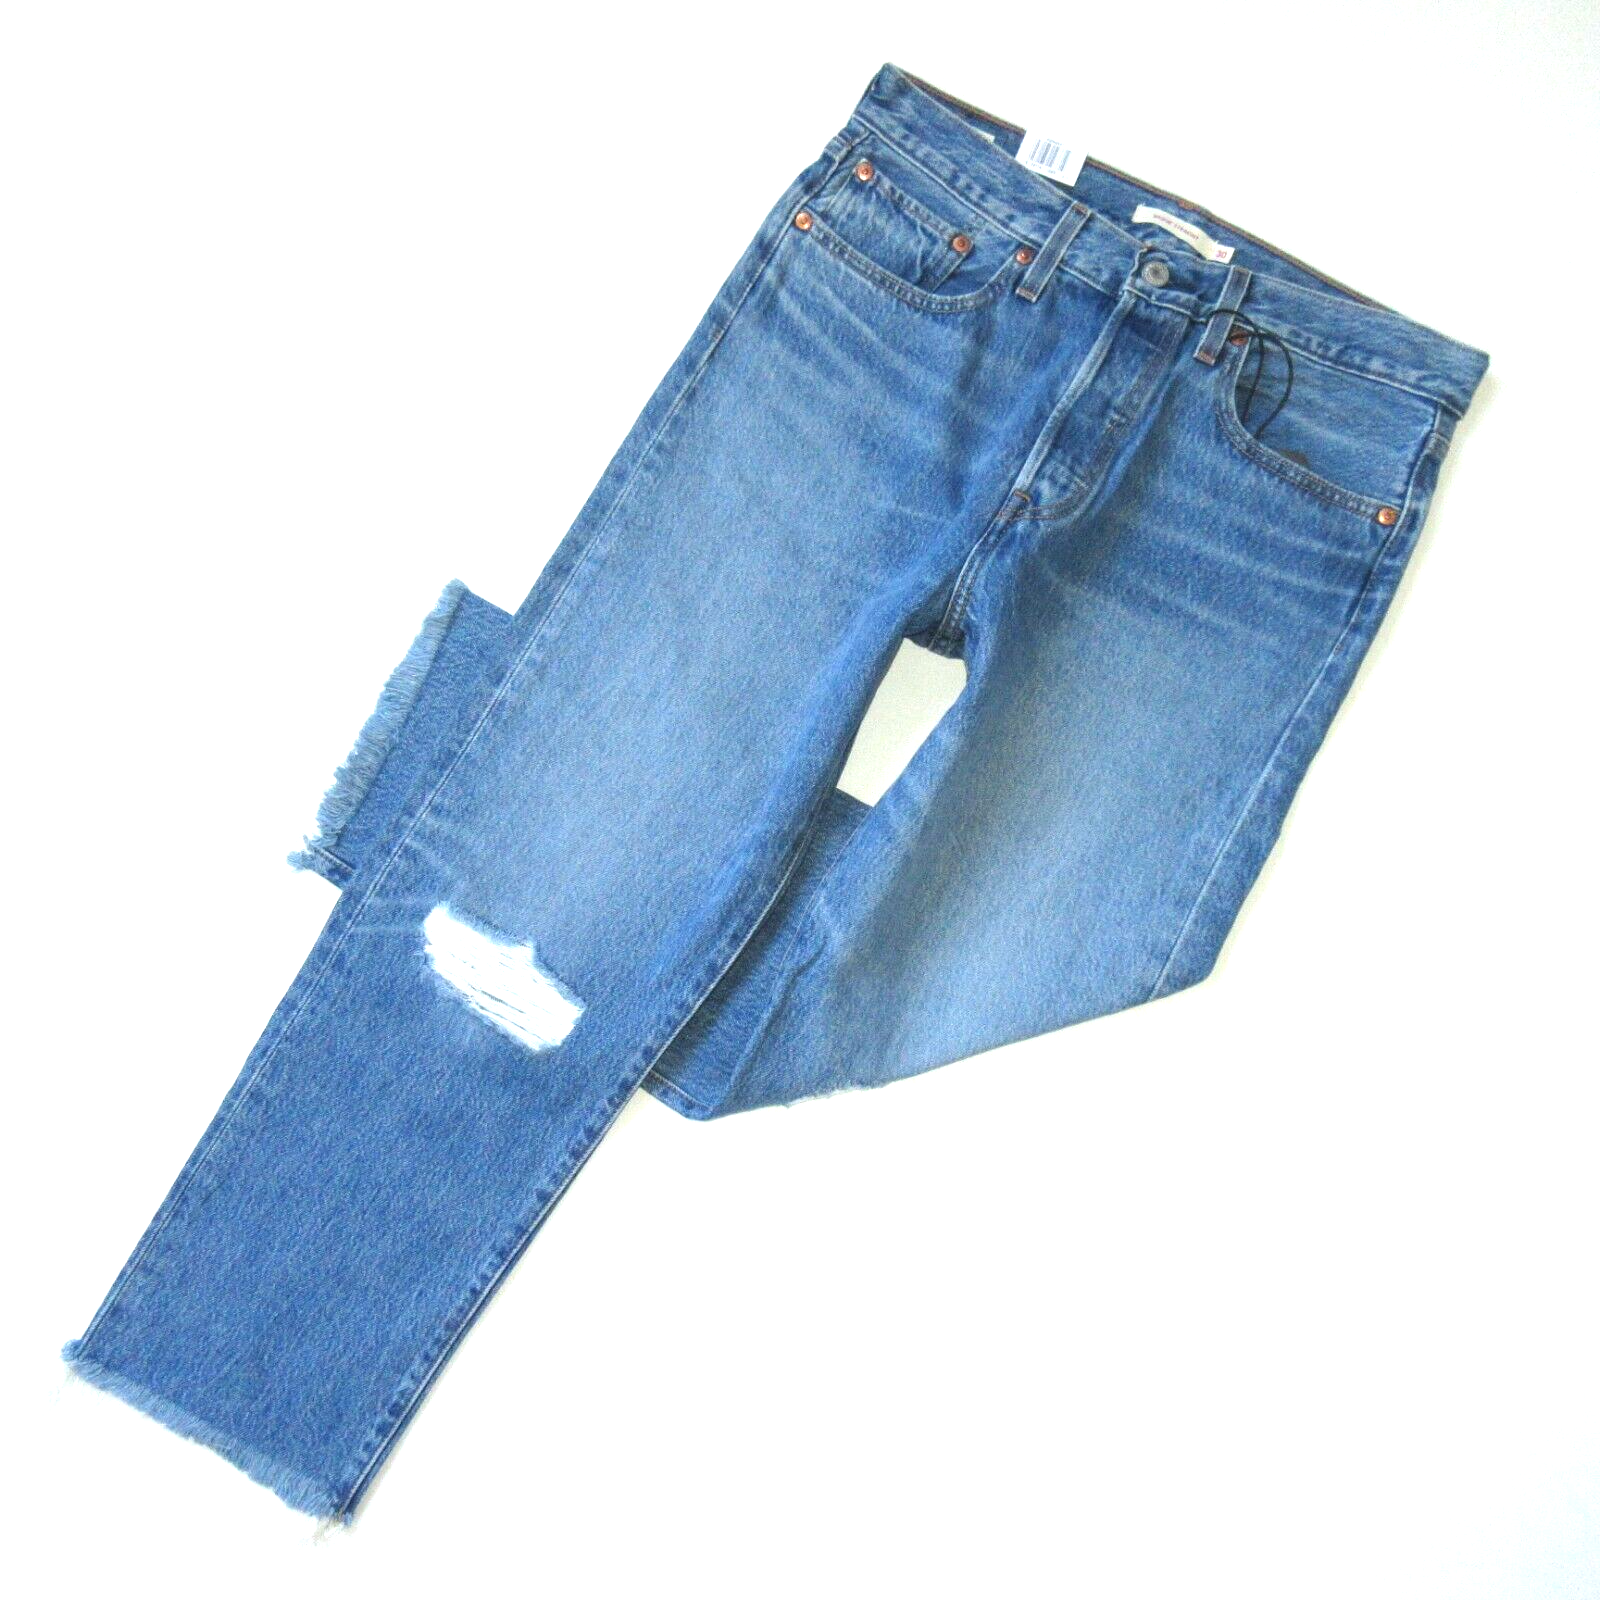 Primary image for NWT Levi's Wedgie Straight in Uncovered Truth Fray Hem Rigid Crop Jeans 30